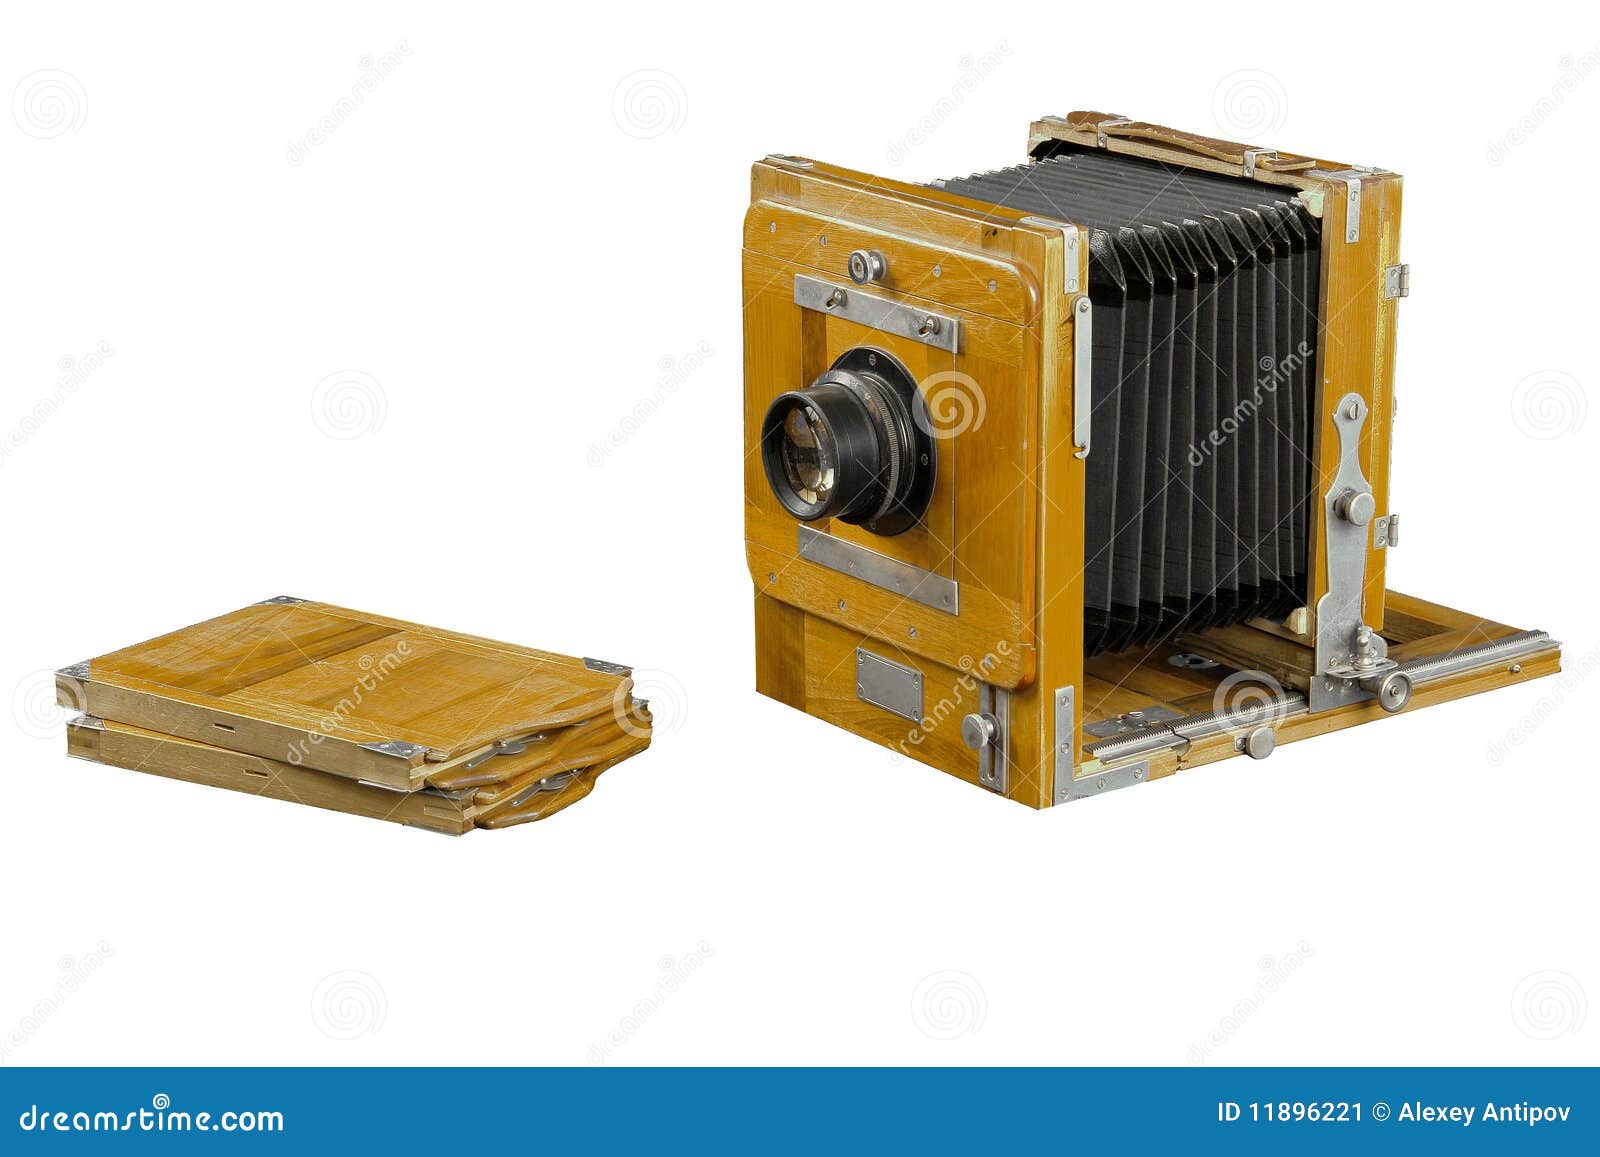 Vintage wood box photo camera and two plate holders on white 